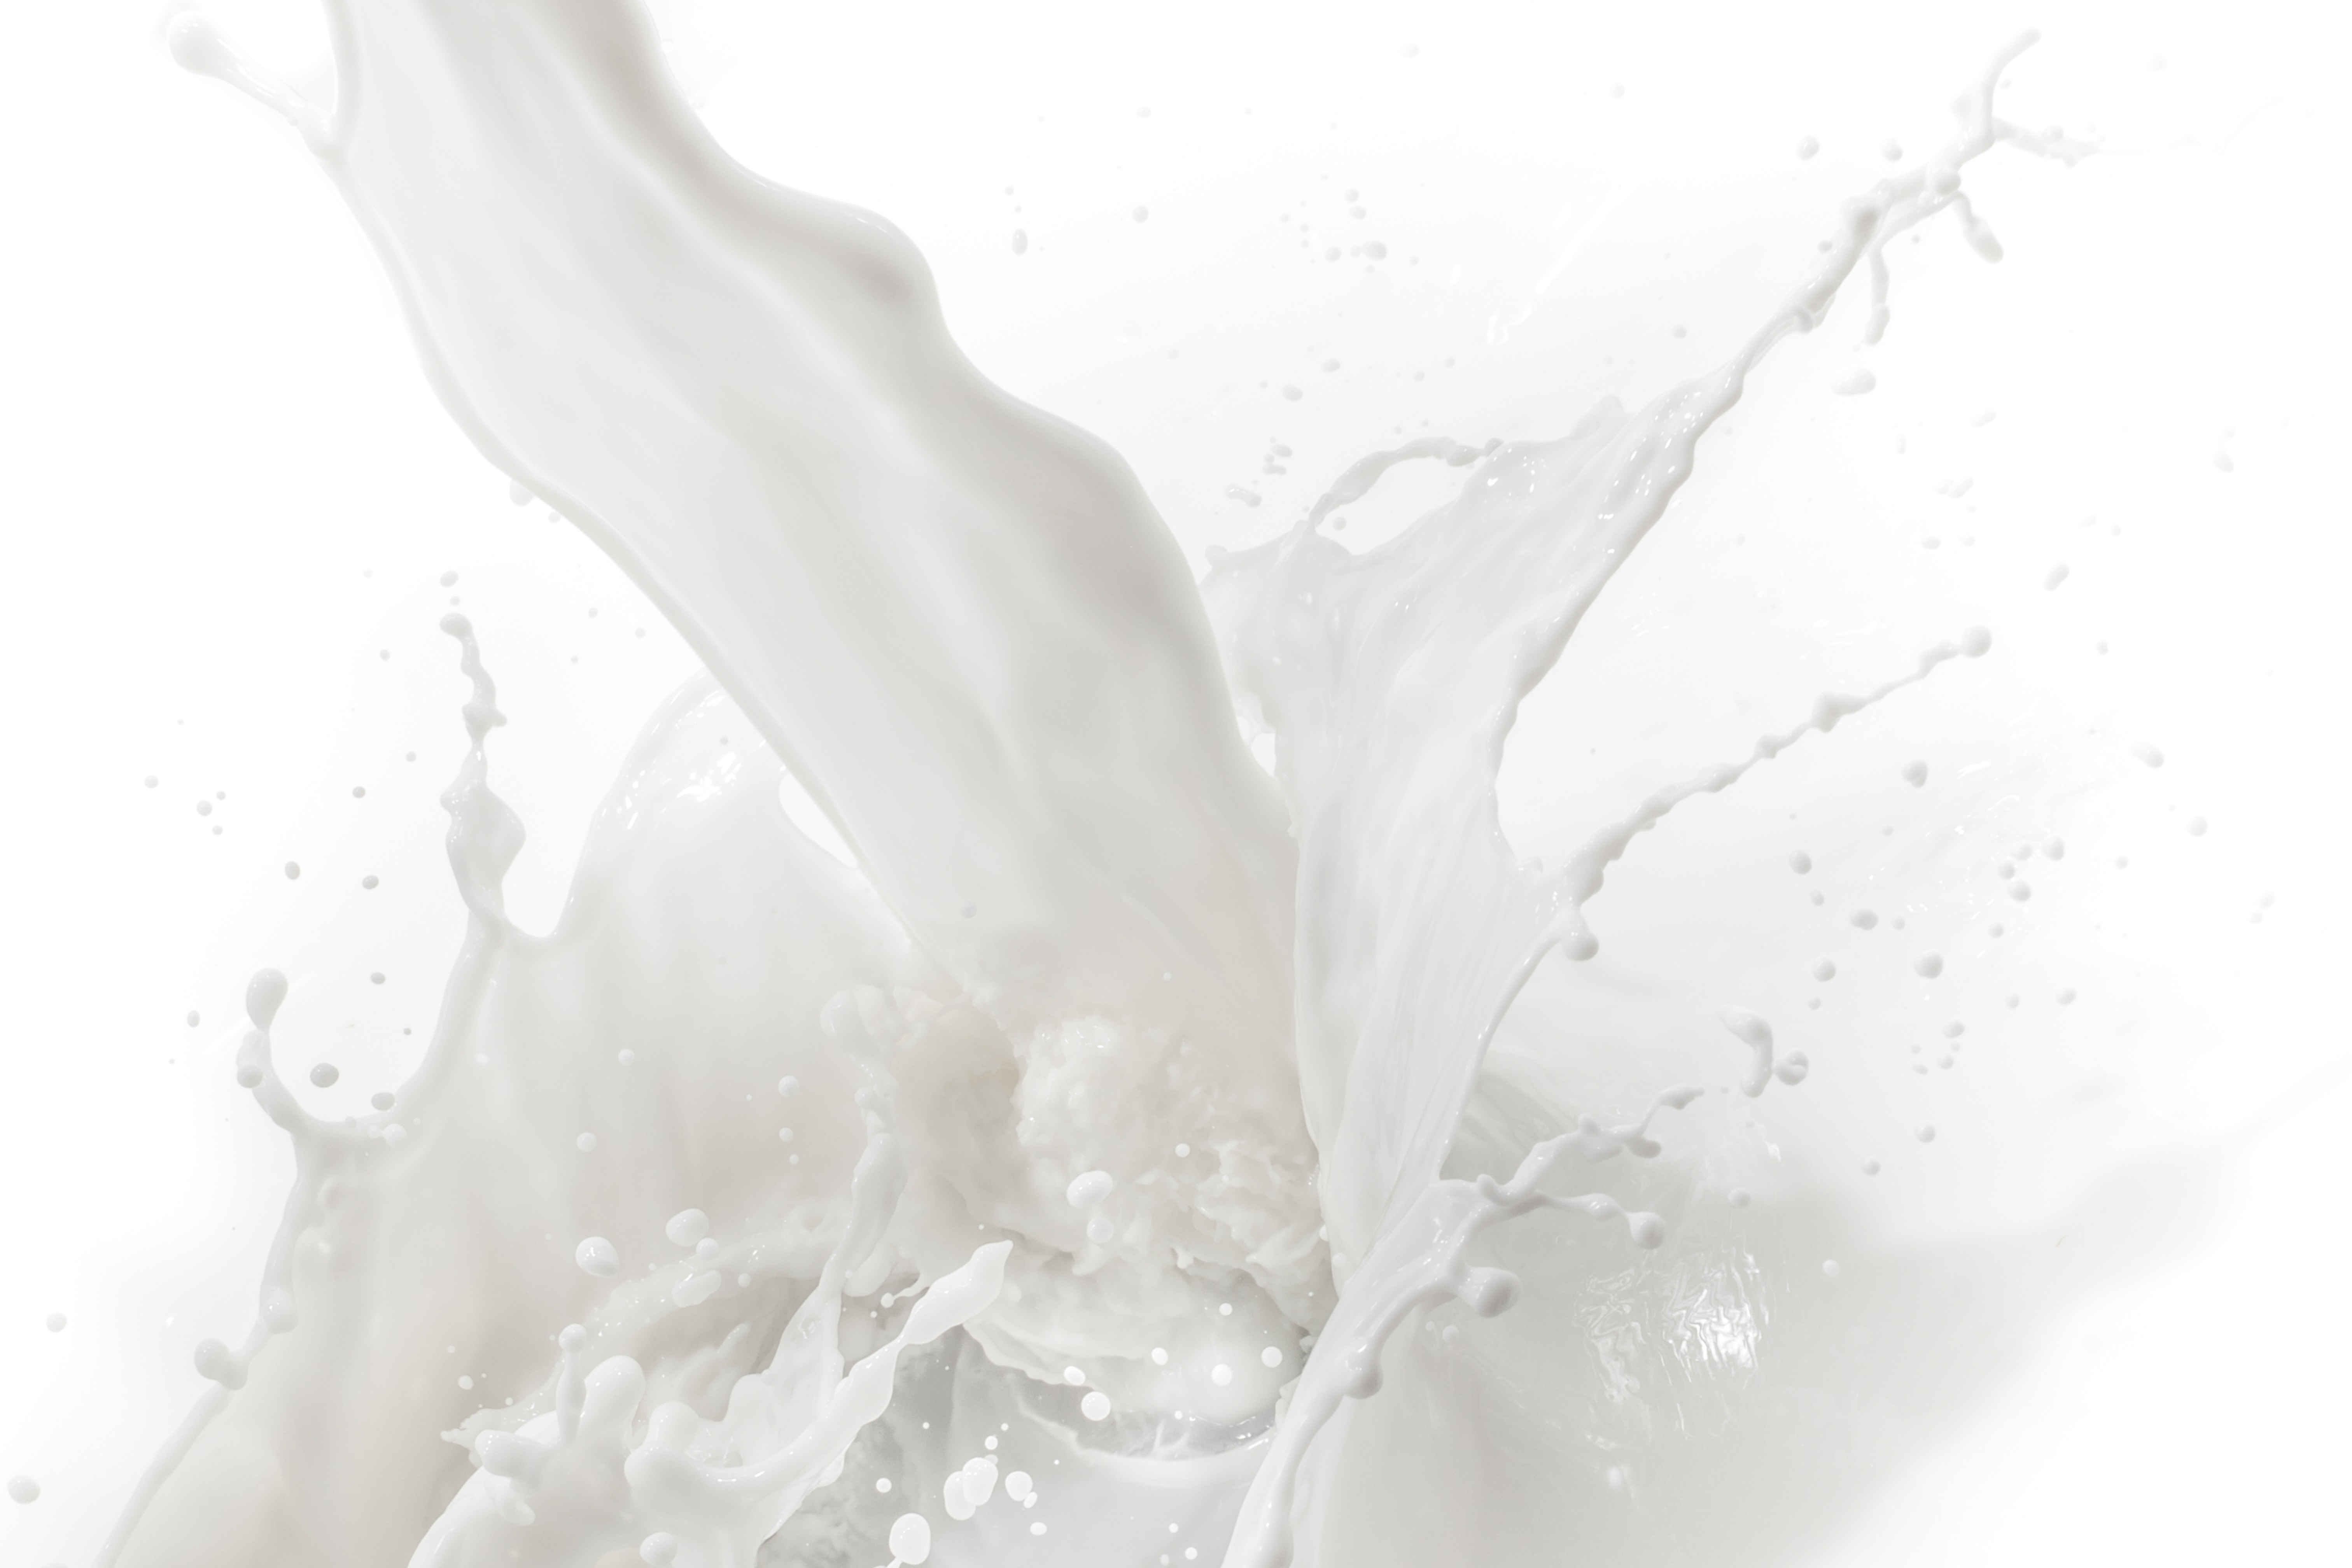 20+ Milk HD Wallpapers and Backgrounds